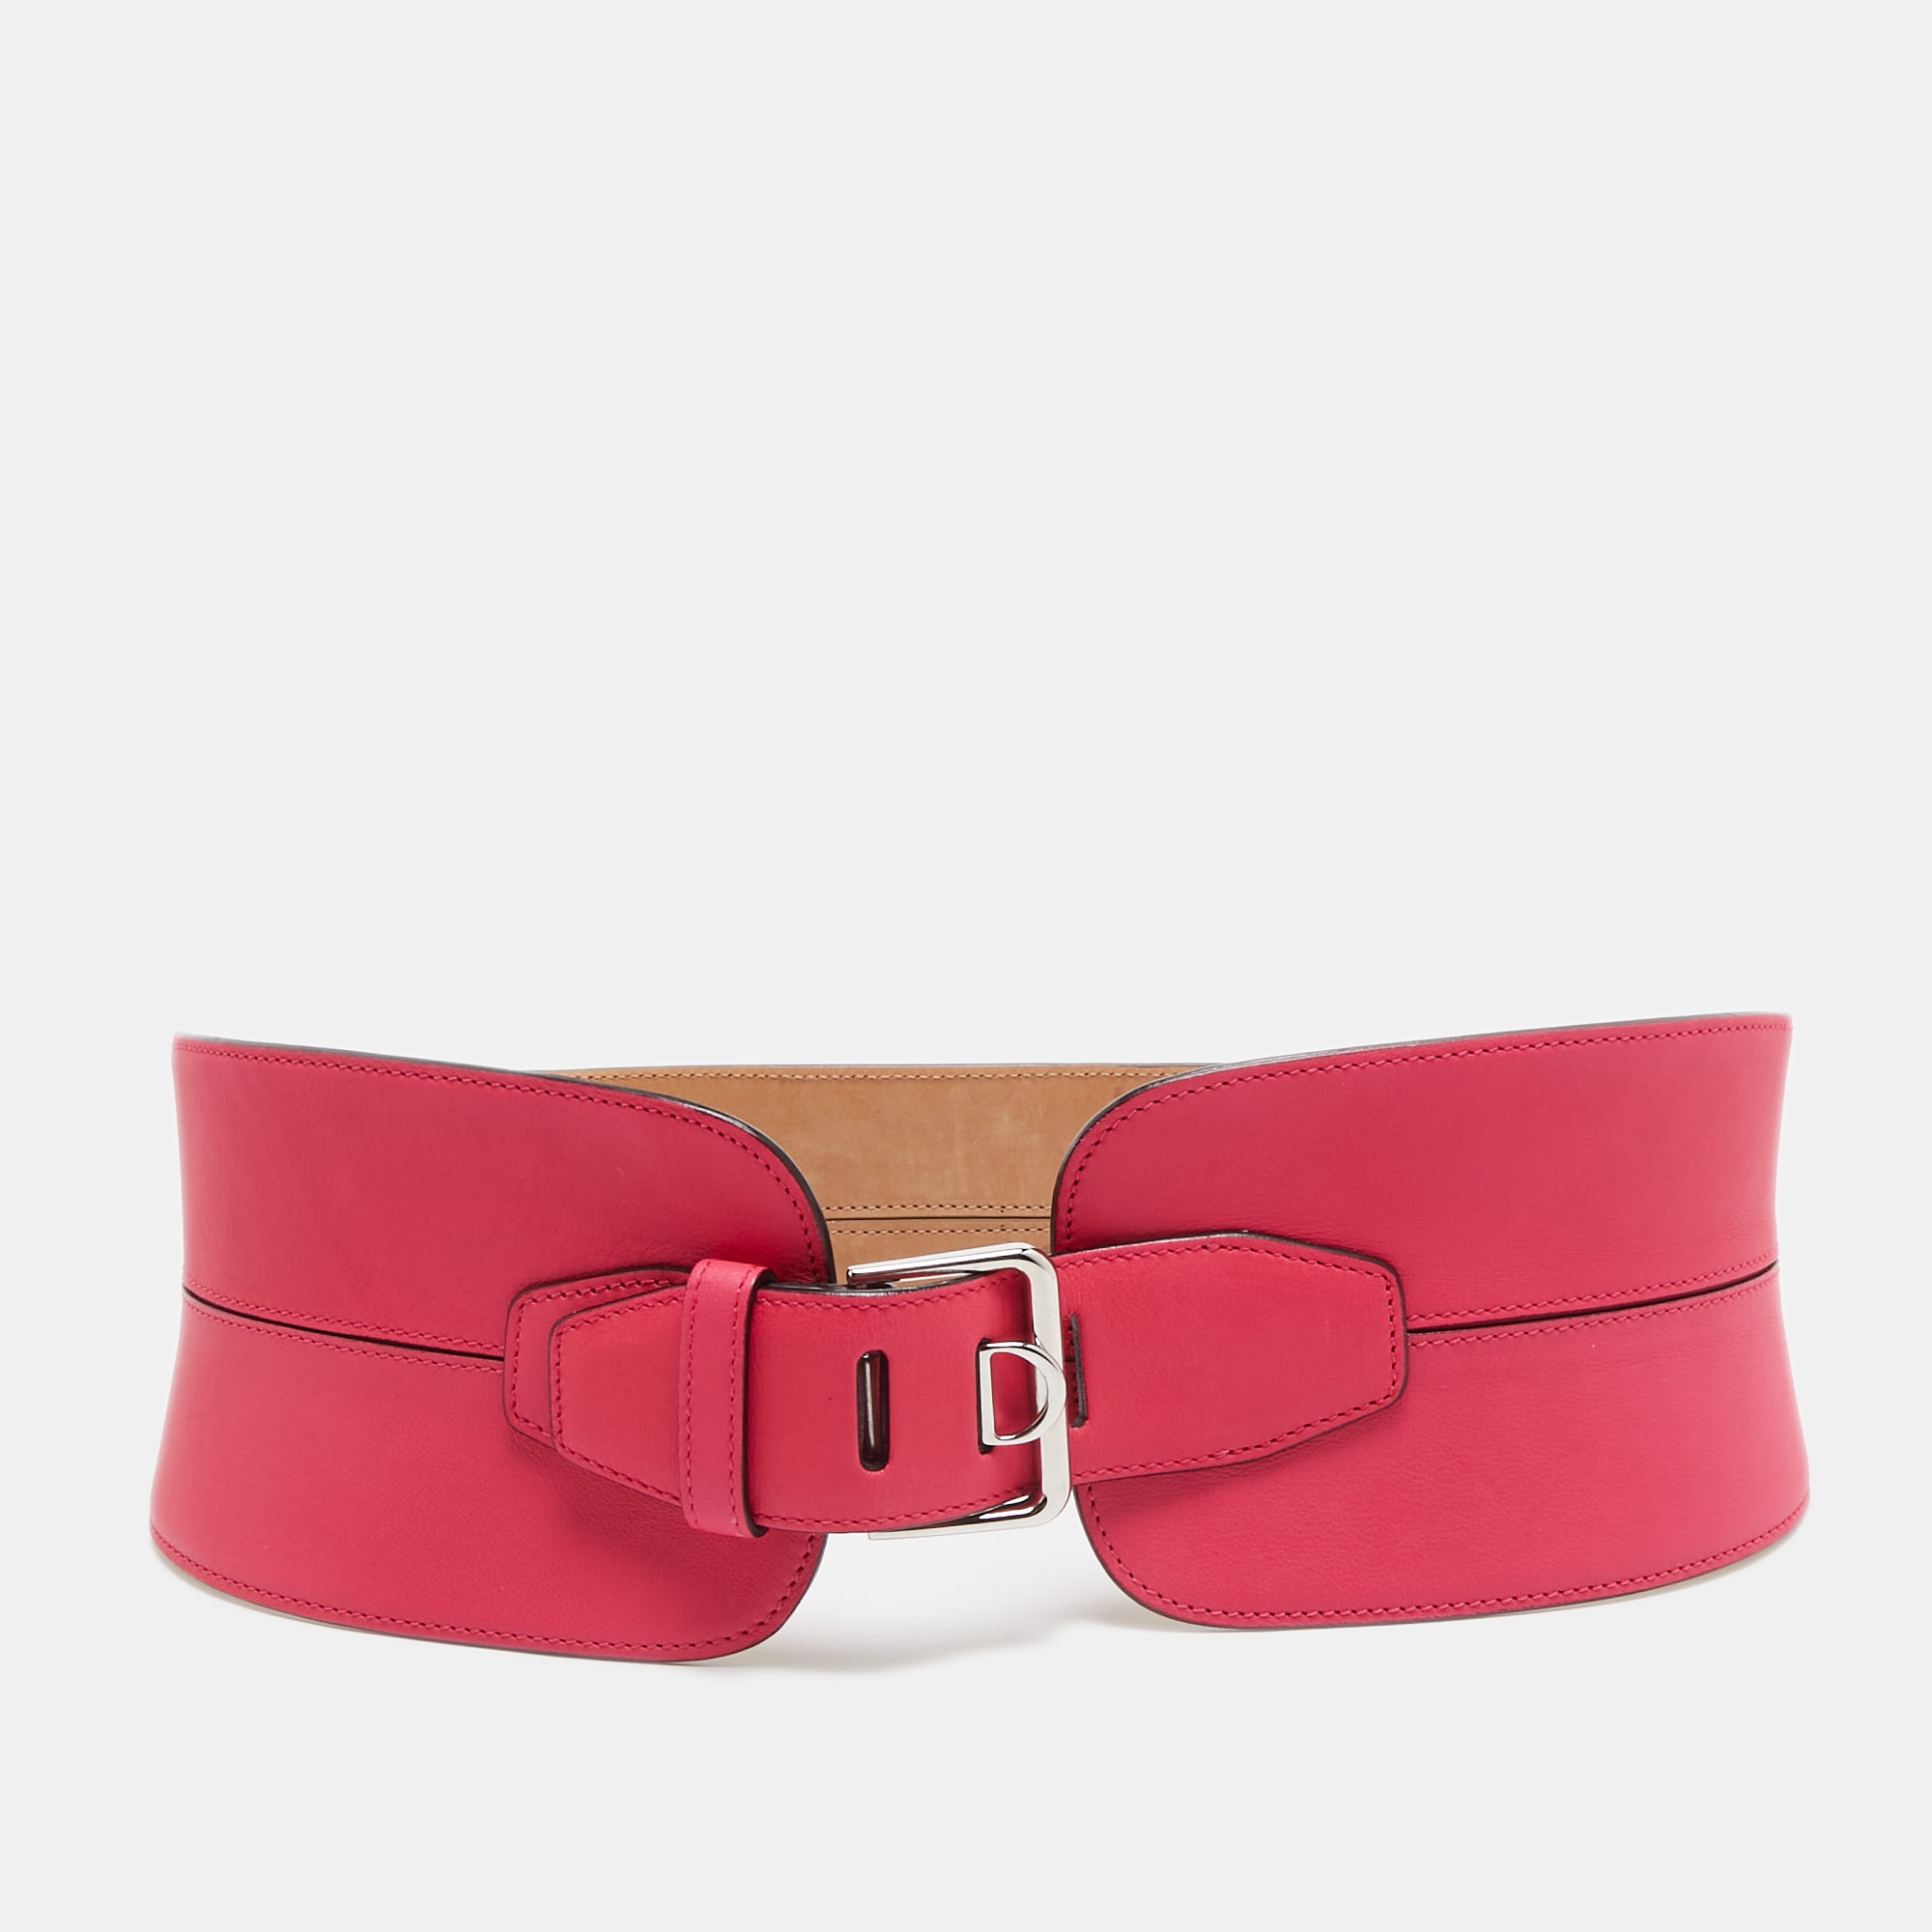 A classic add on to your collection of belts is this designer piece. Cut to a convenient length the belt has a smooth finish and a sturdy built. It will continually complement your style.